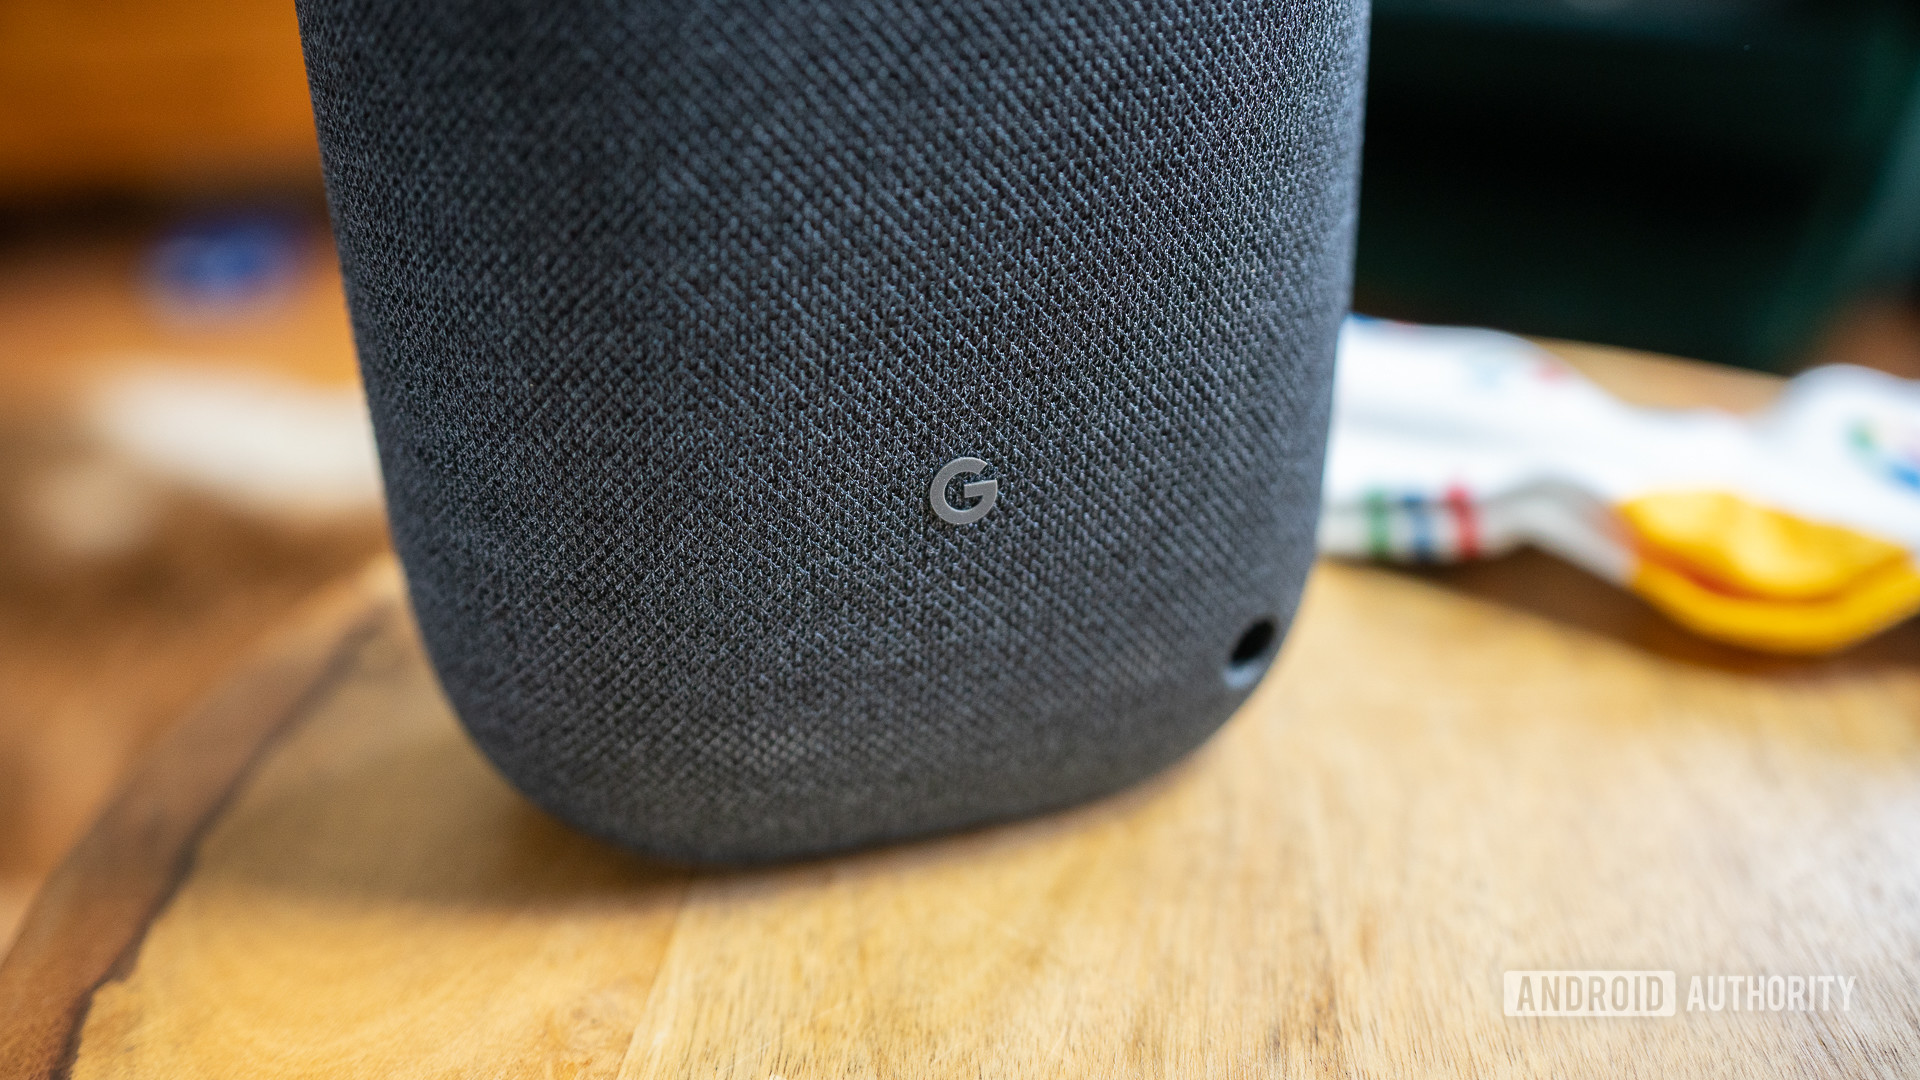 Pictured is the &quot;G&quot; logo on the back on the Google Nest Audio on a wooden surface